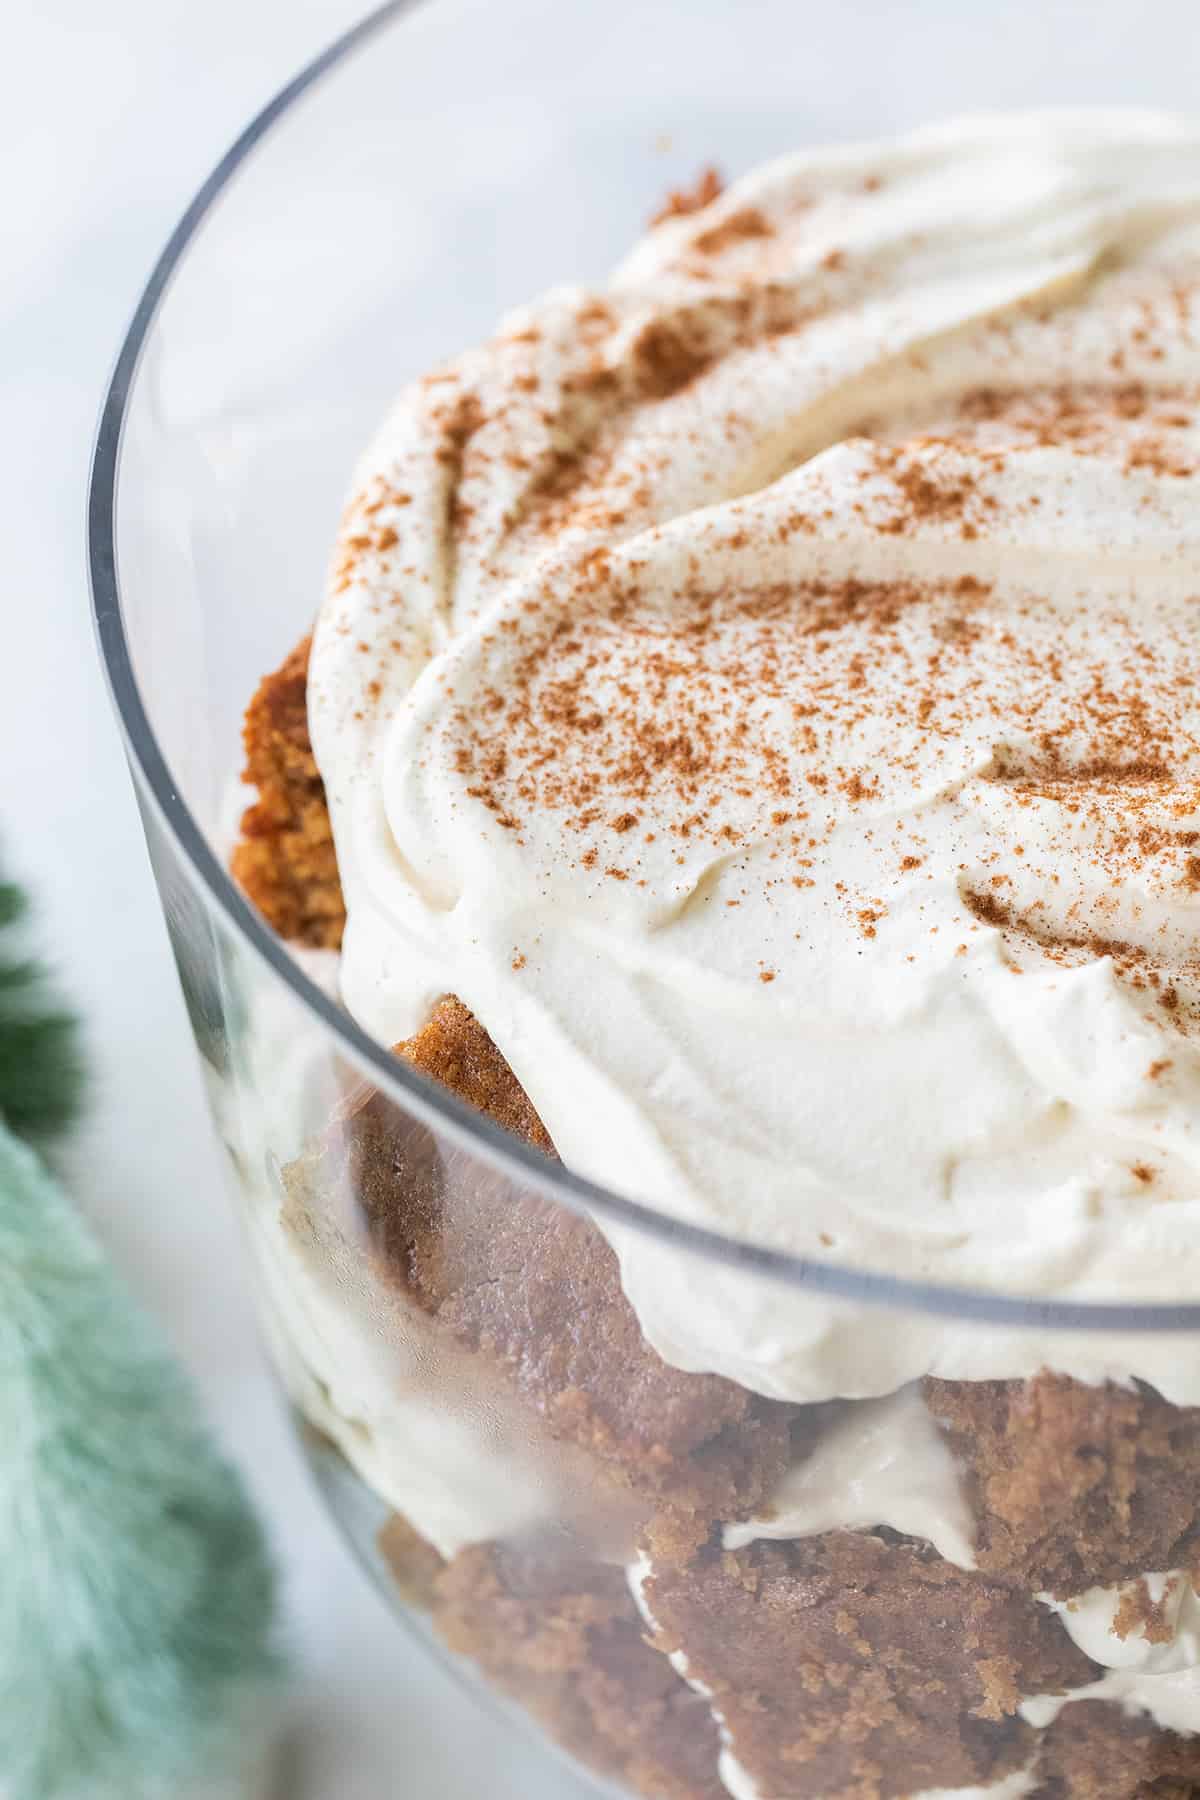 Molasses whipped cream with cinnamon.